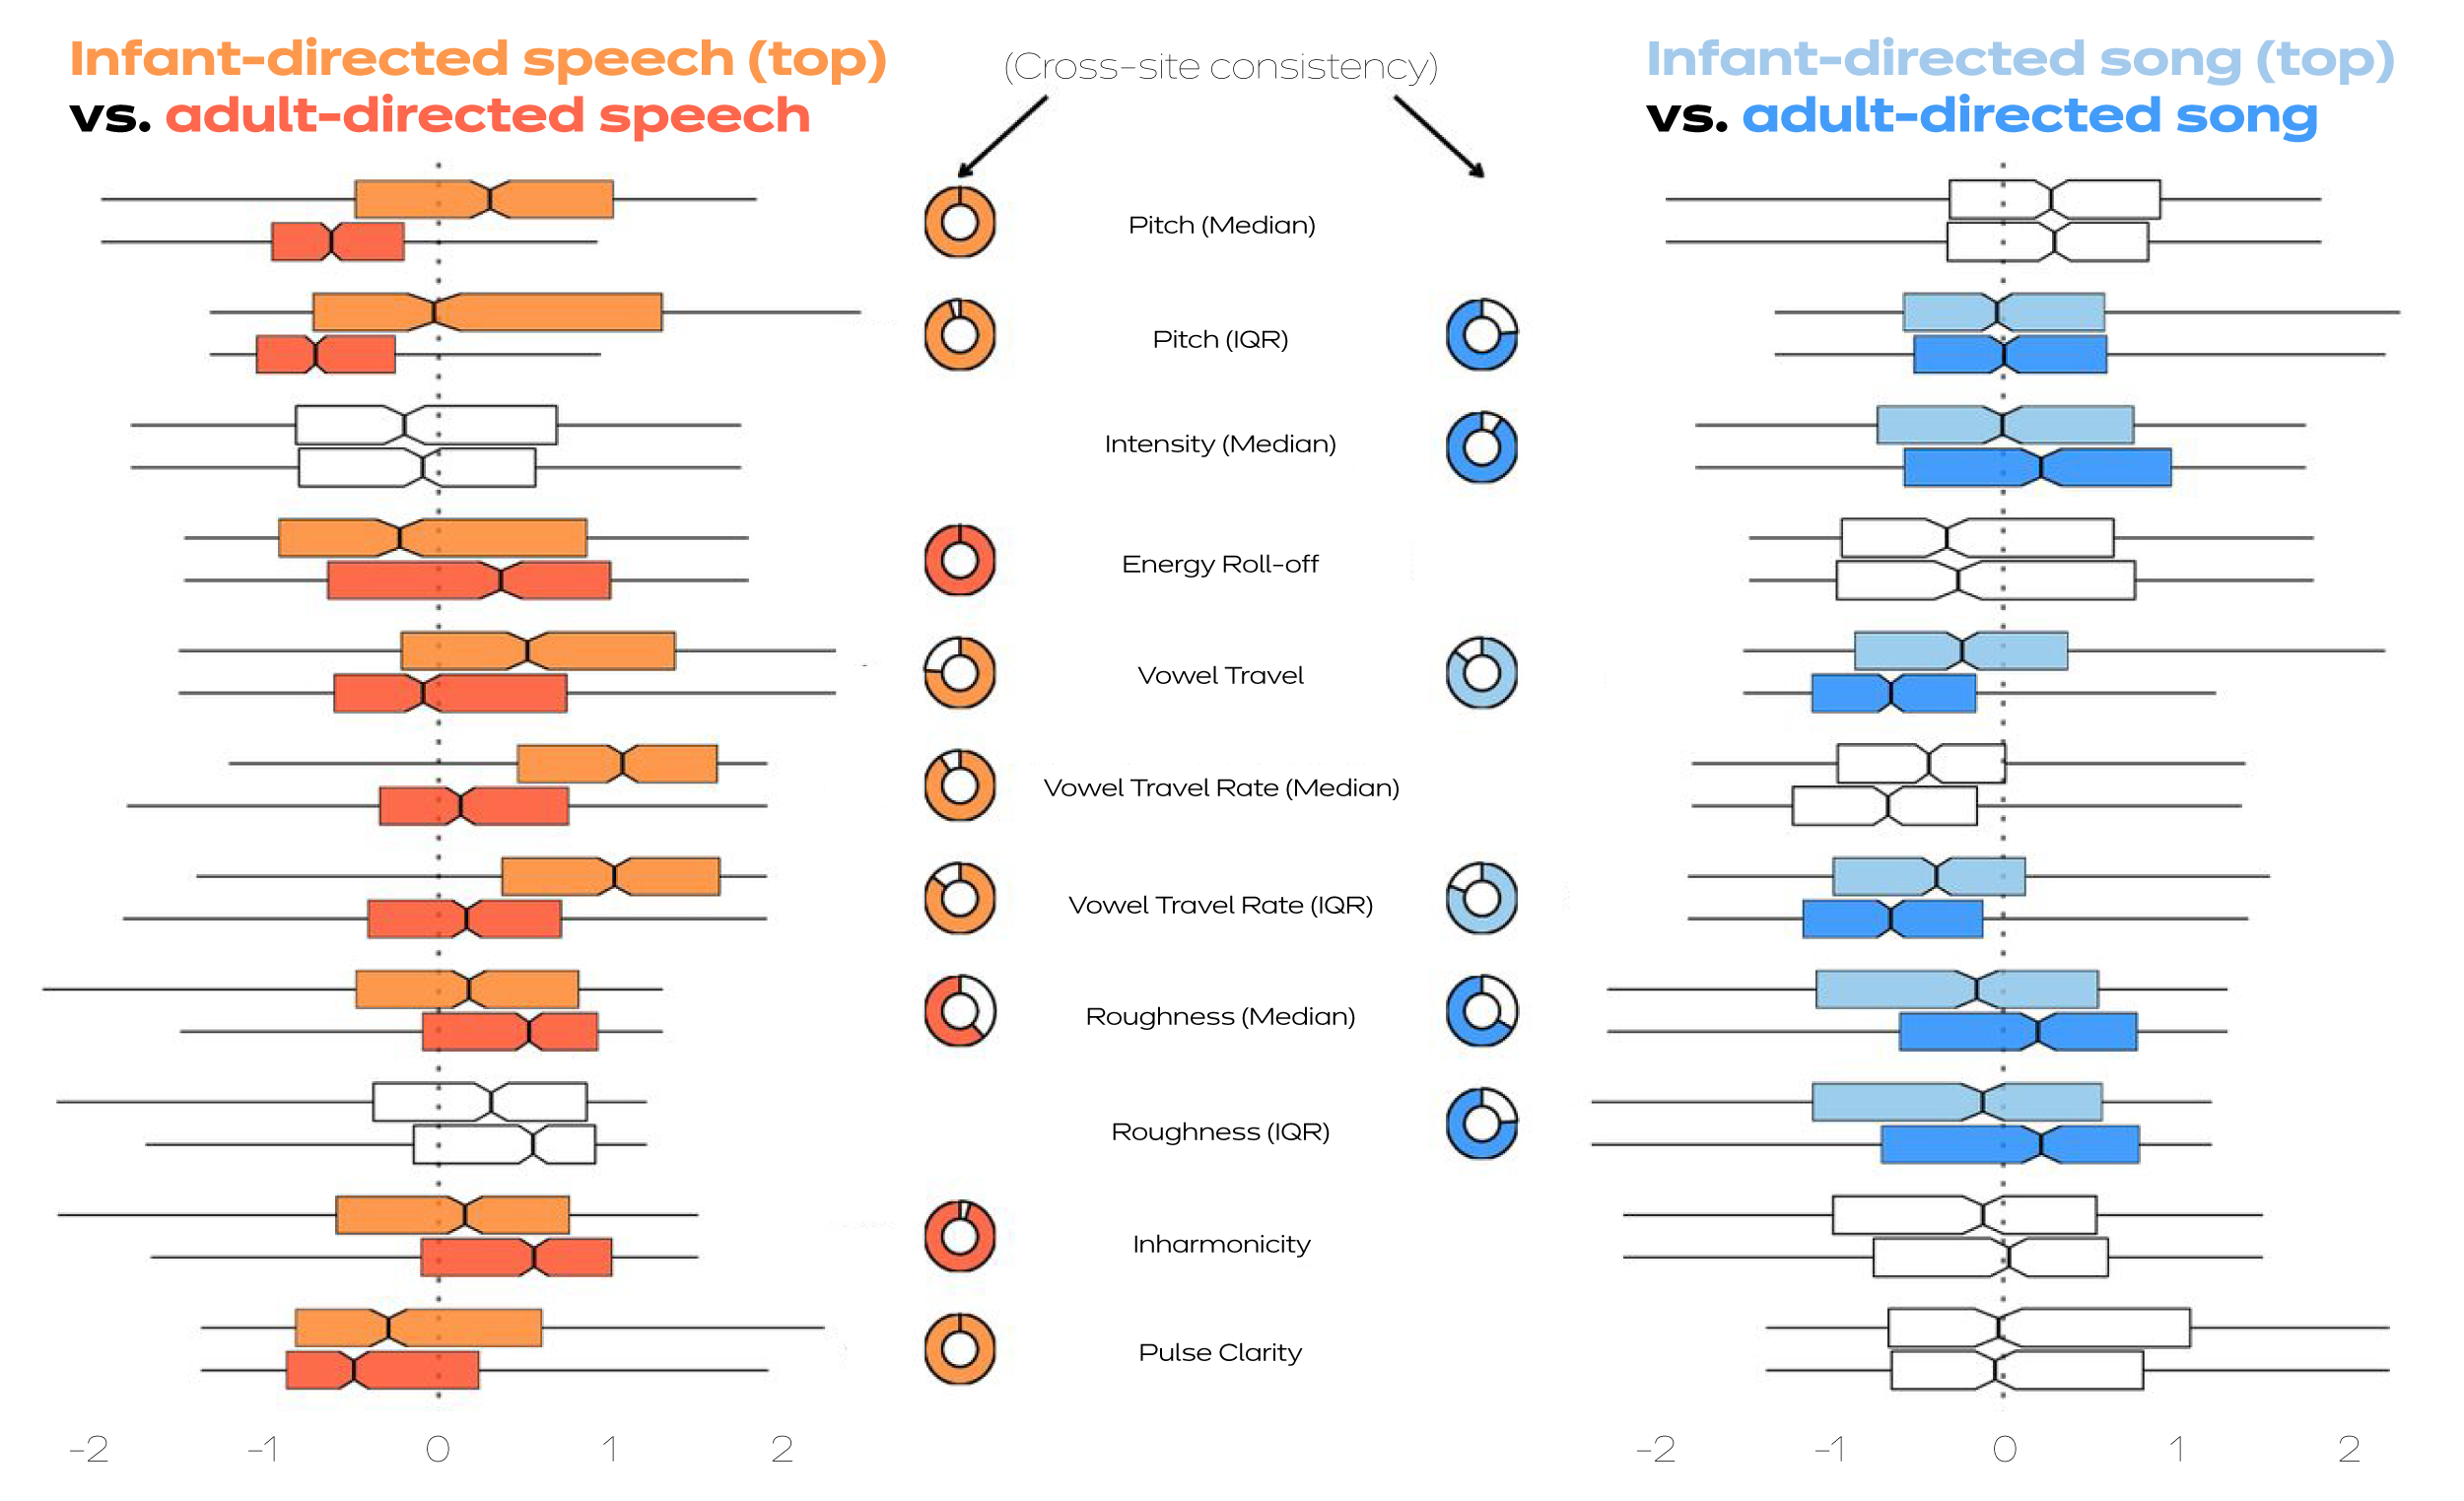 Visualization comparing voice pitch tends to be higher when adults are speaking to babies.